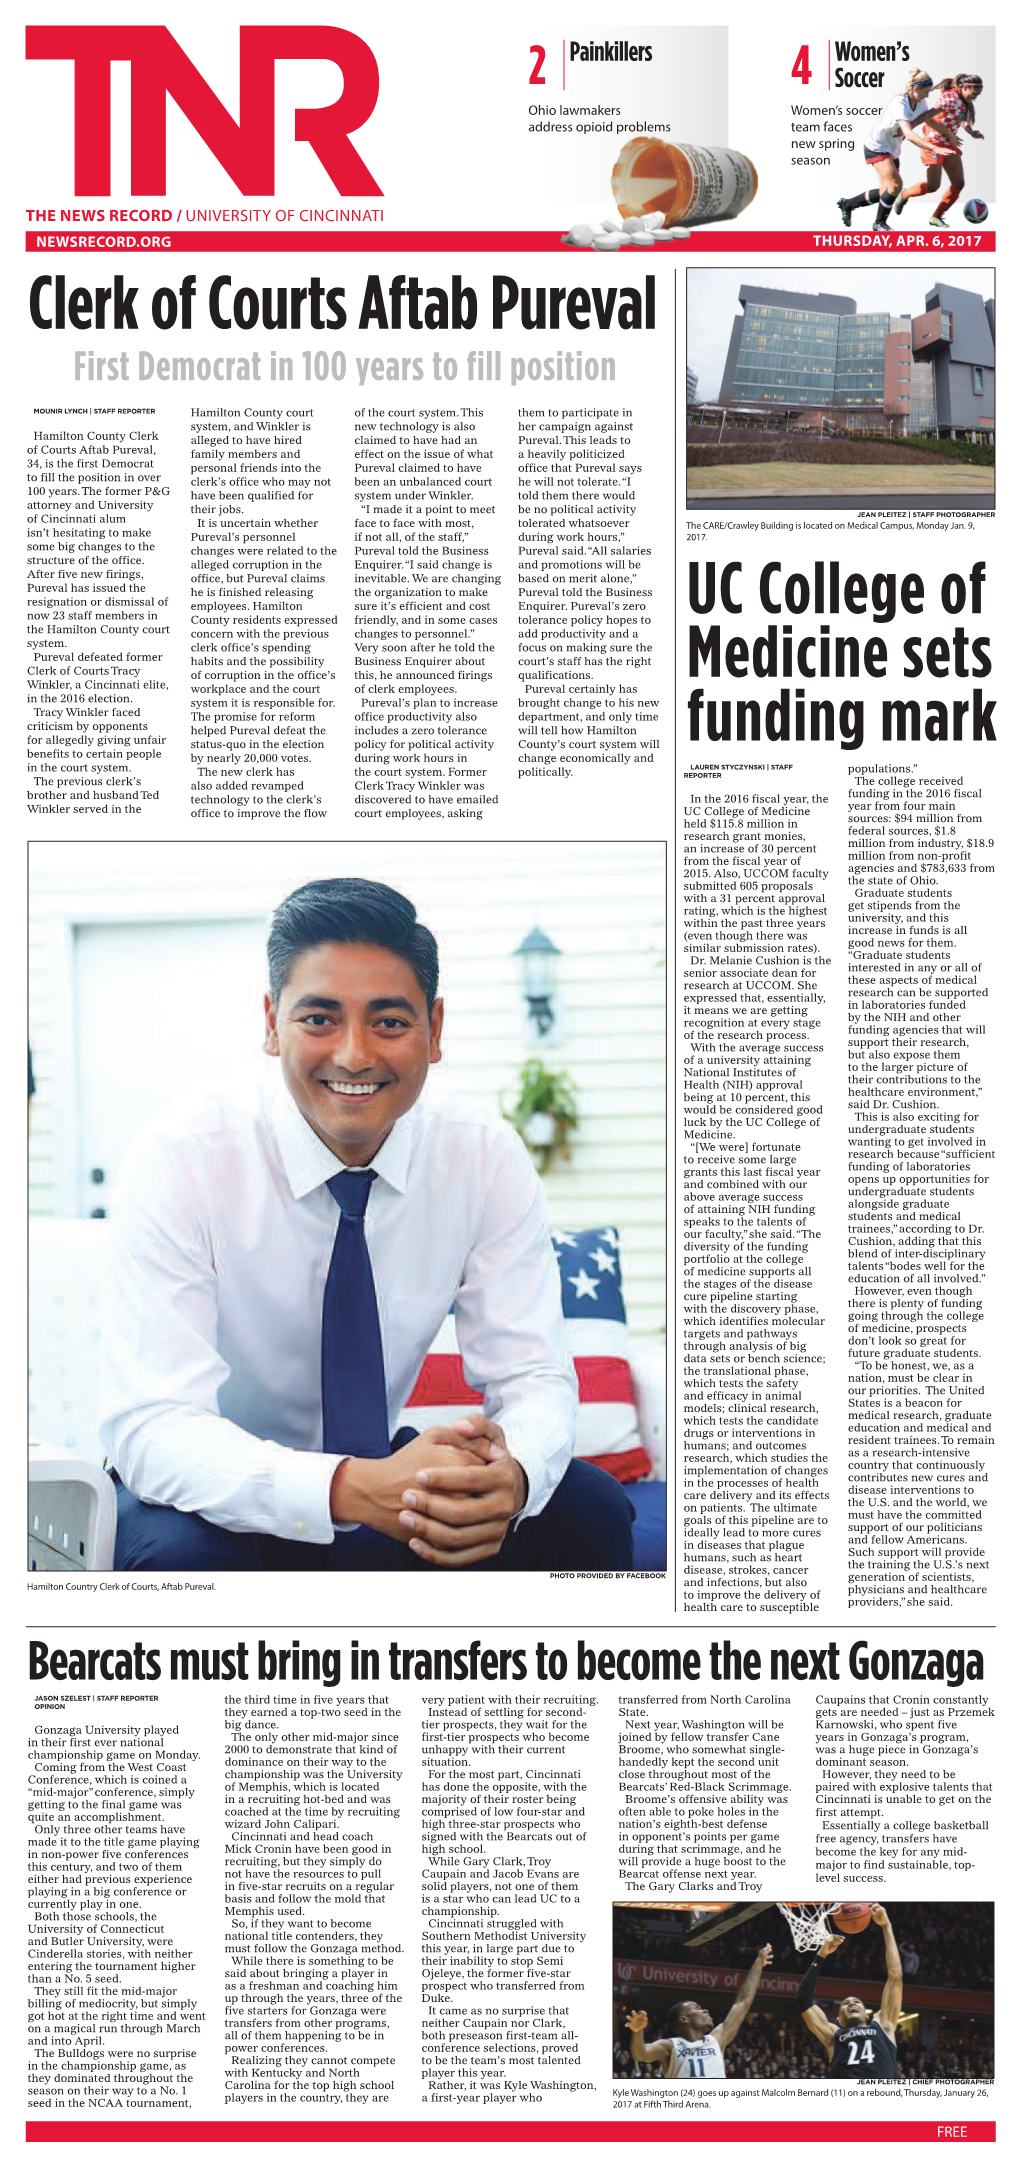 Clerk of Courts Aftab Pureval First Democrat in 100 Years to Fill Position